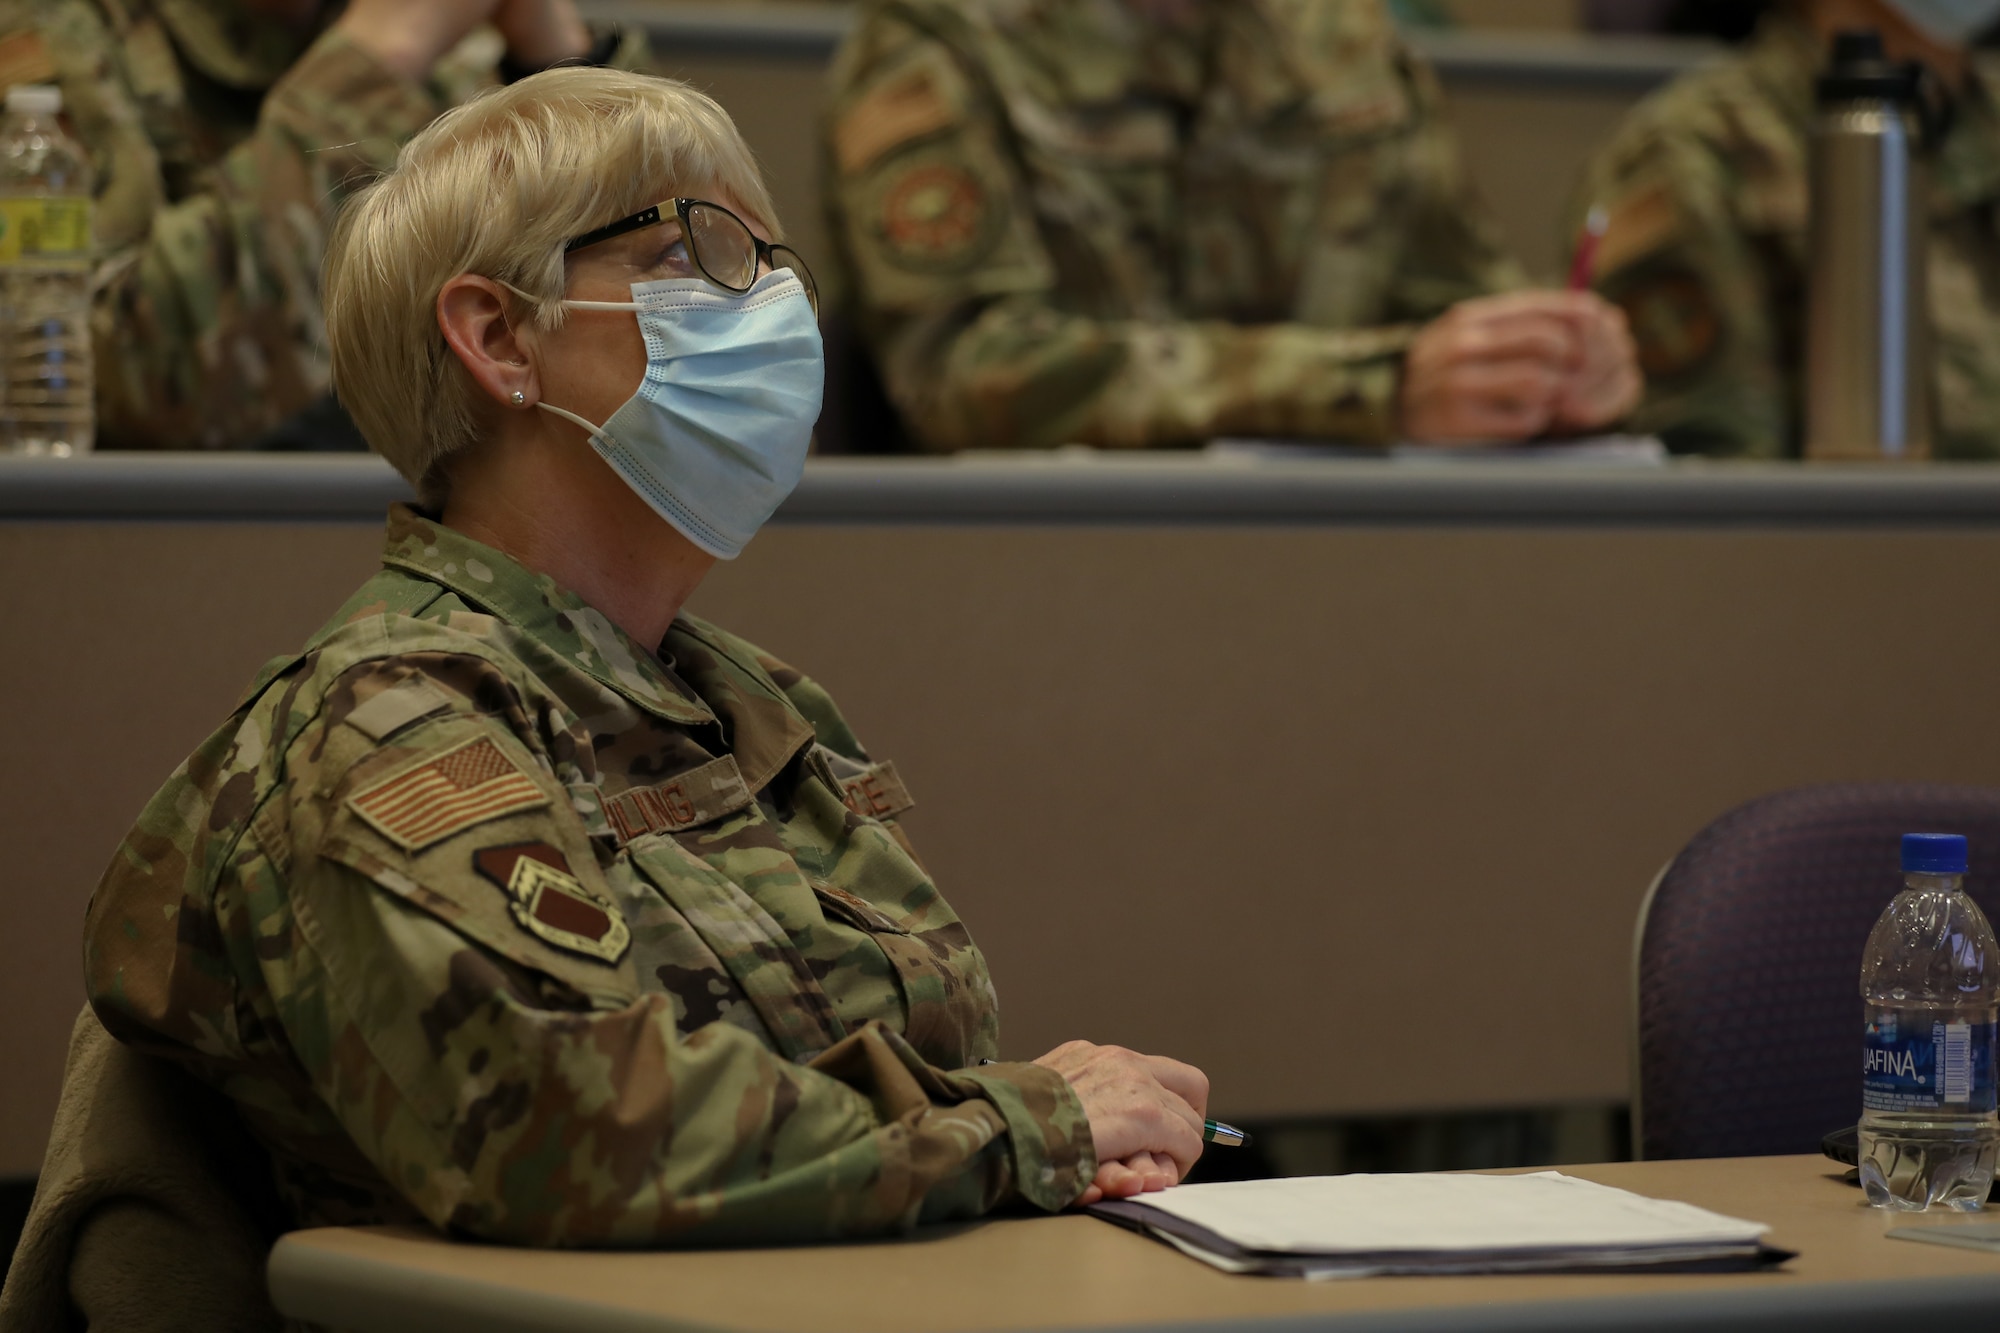 U.S. Air Force Col. Colleen Frohling, the officer in charge of a U.S Air Force medical team assigned to Luke Air Force Base, Arizona, attends a joint reception, staging, onward movement and integration brief to discuss mission expectations and operational procedures while supporting COVID response operations at University of Rochester Medical Center, Rochester, New York, Feb.12, 2022.